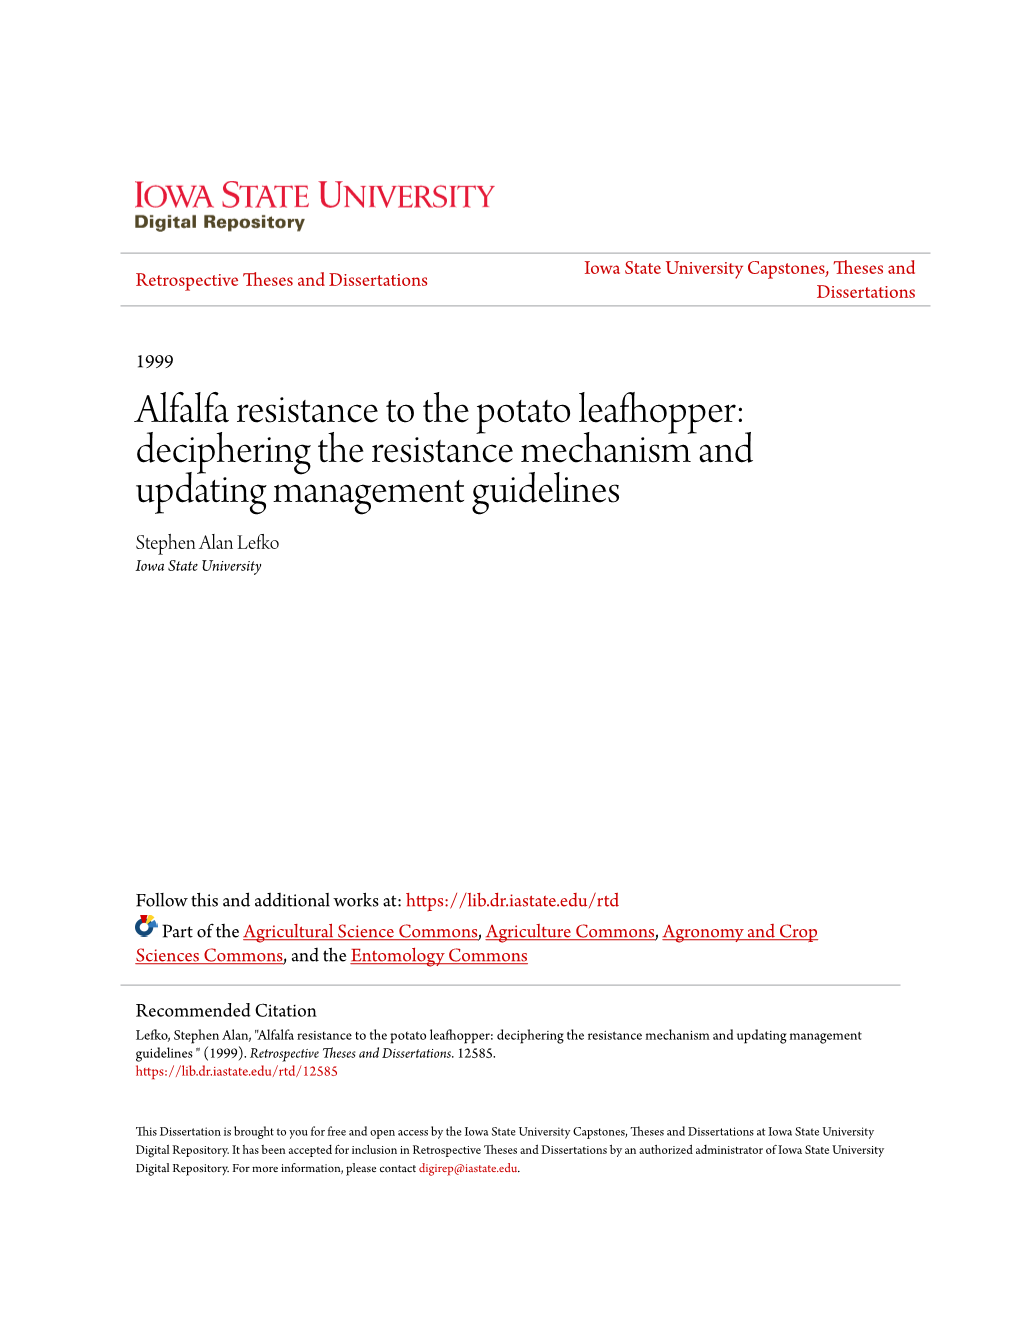 Alfalfa Resistance to the Potato Leafhopper: Deciphering the Resistance Mechanism and Updating Management Guidelines Stephen Alan Lefko Iowa State University